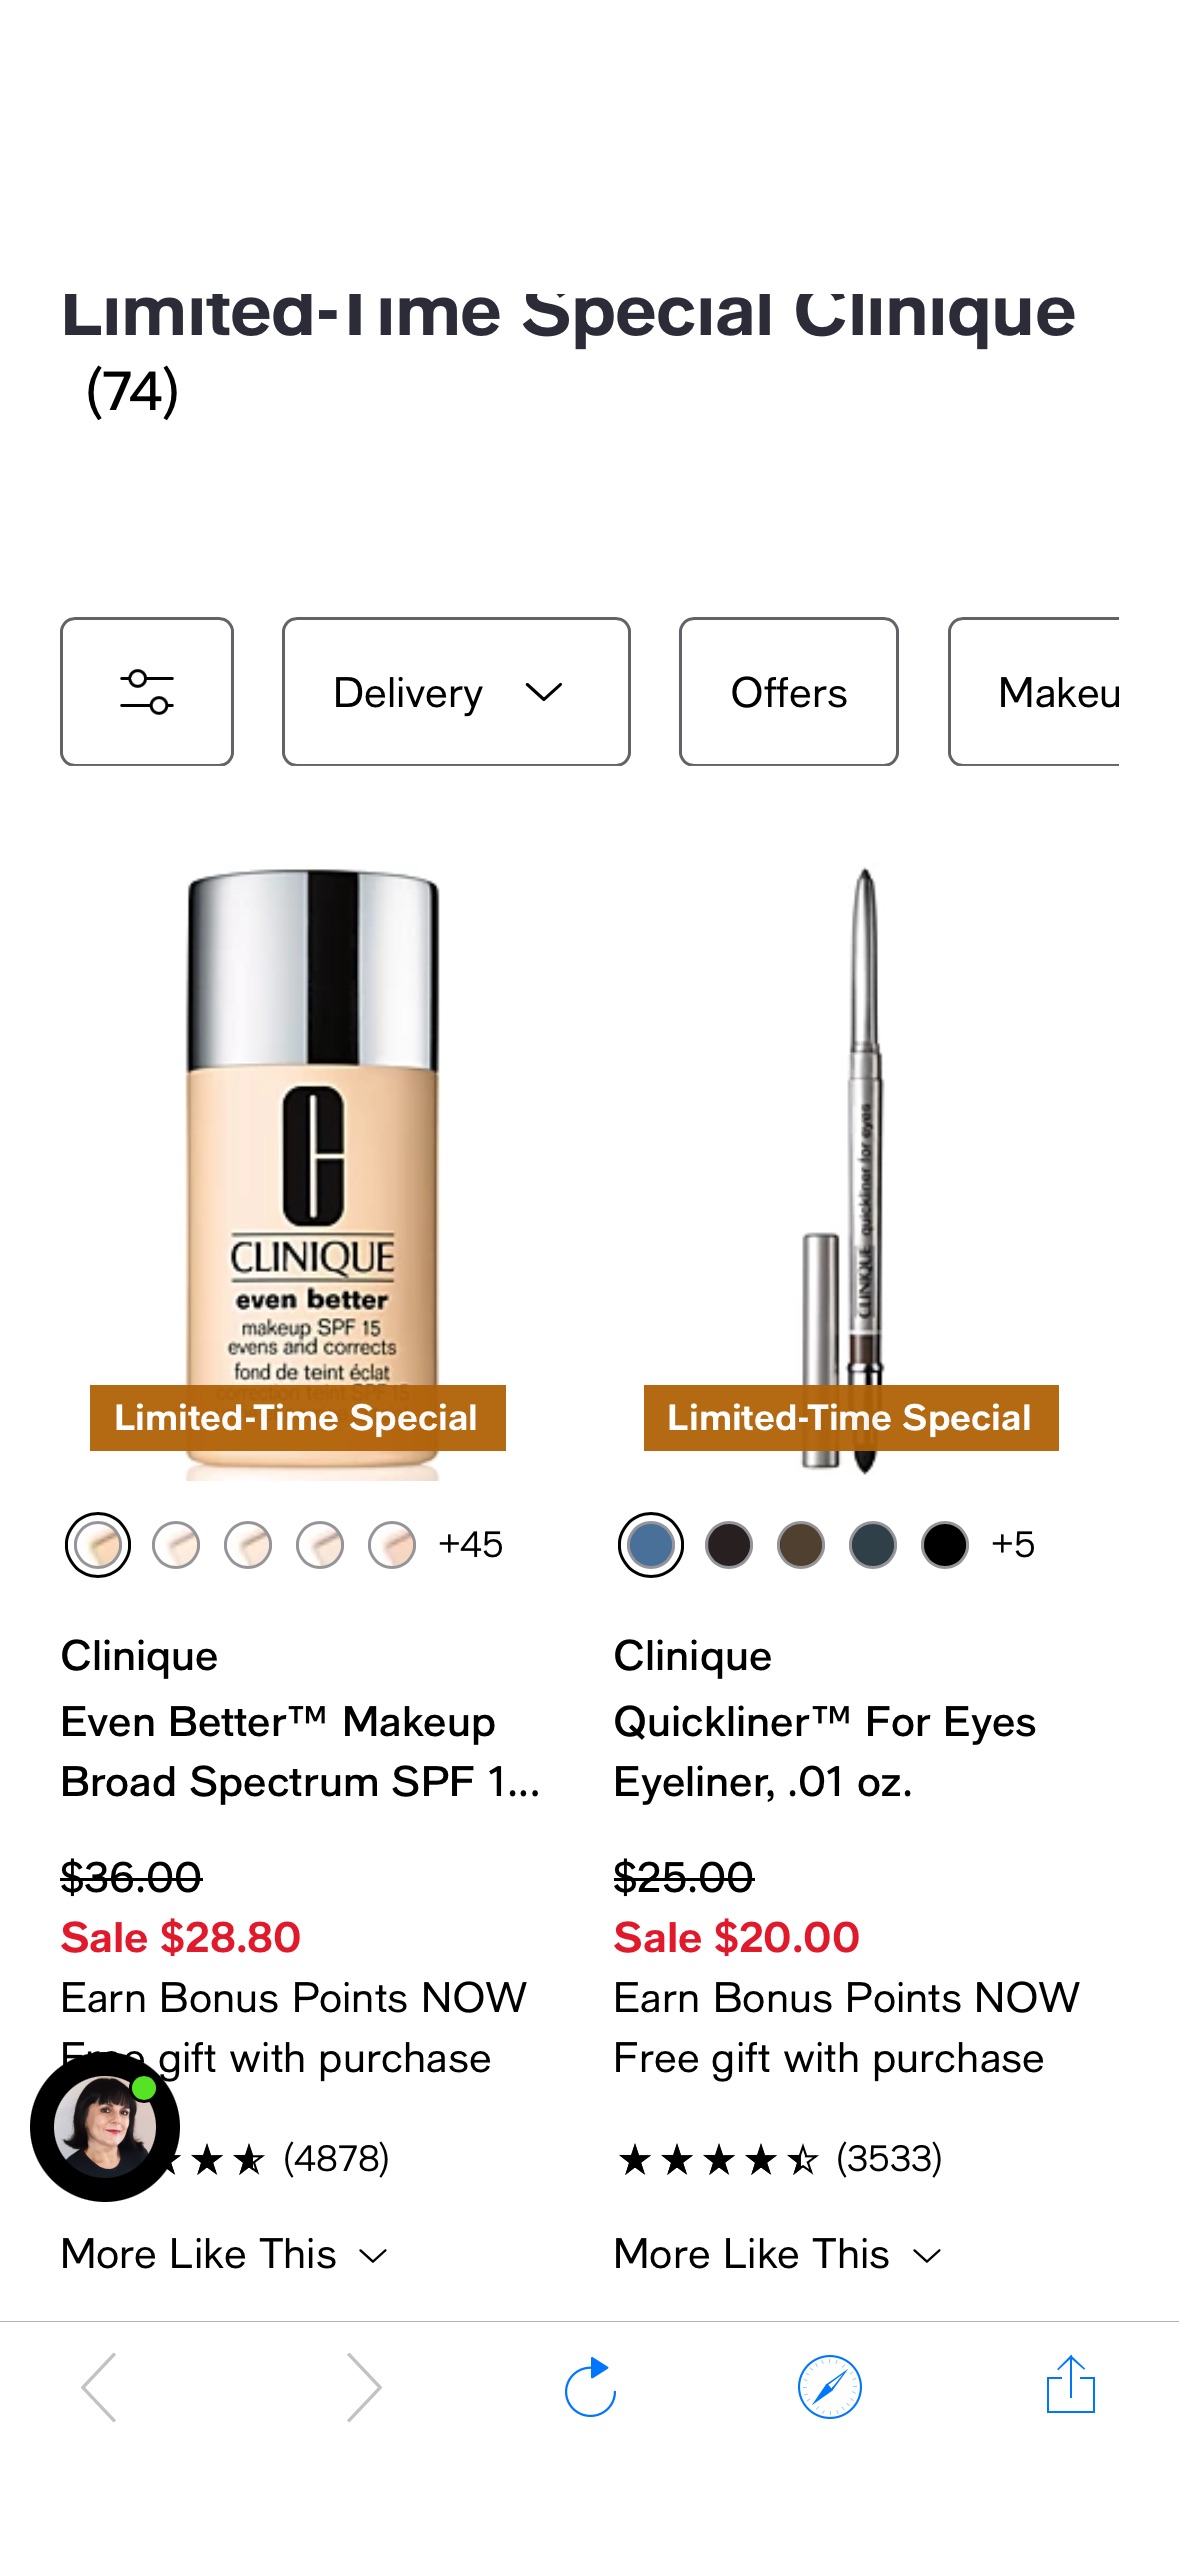 20% off Clinique makeup—happening NOW at Macy’s